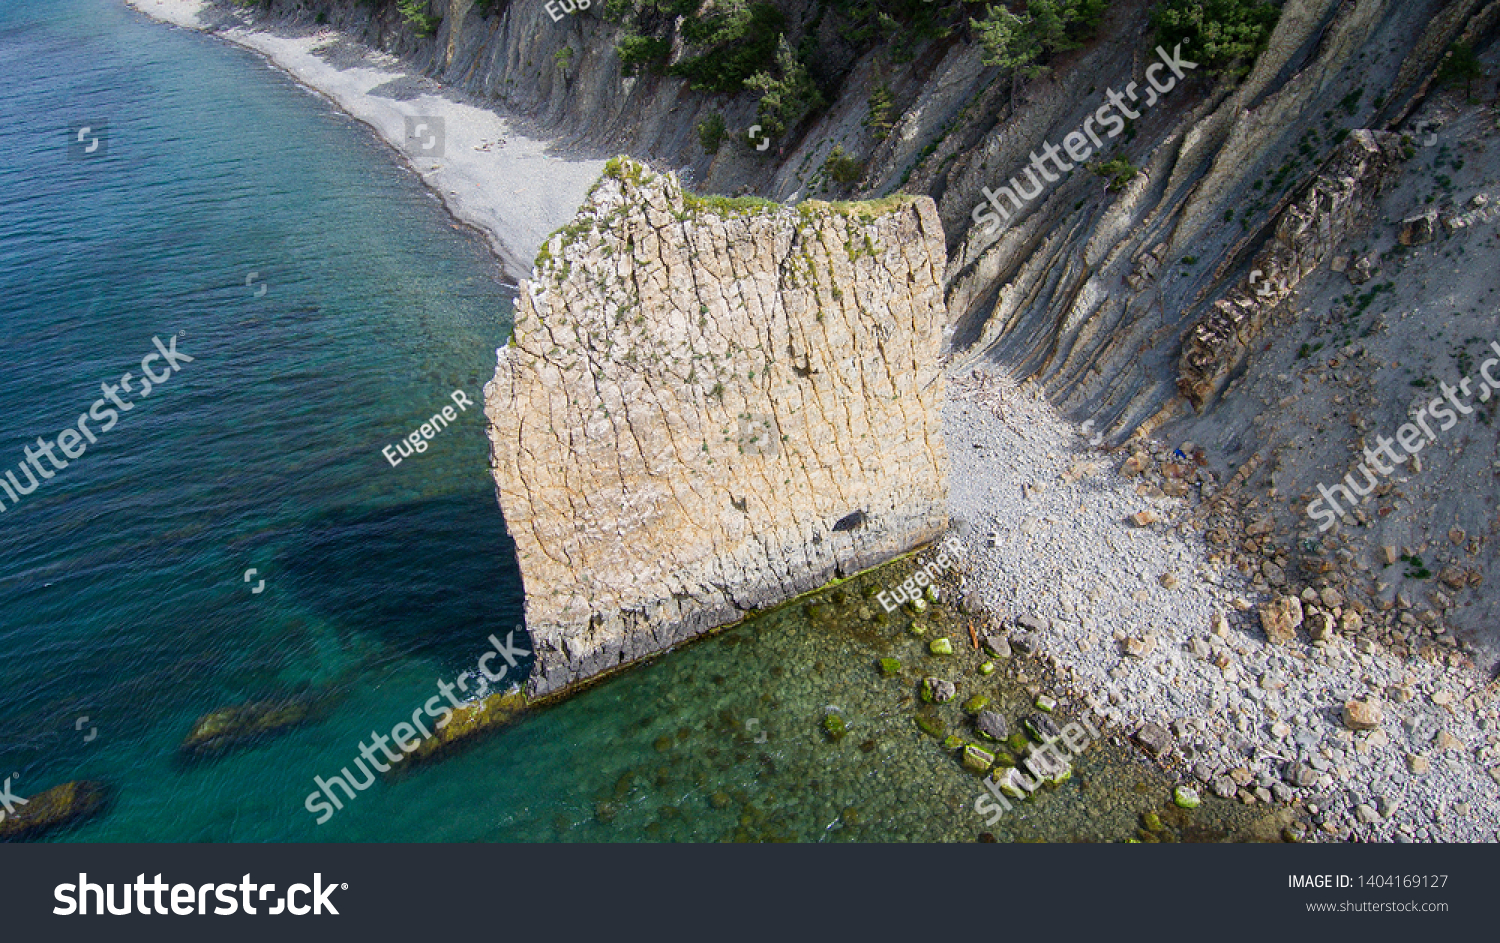 Monument of nature - Sail Rock, or Parus Rock. Aerial view. #1404169127